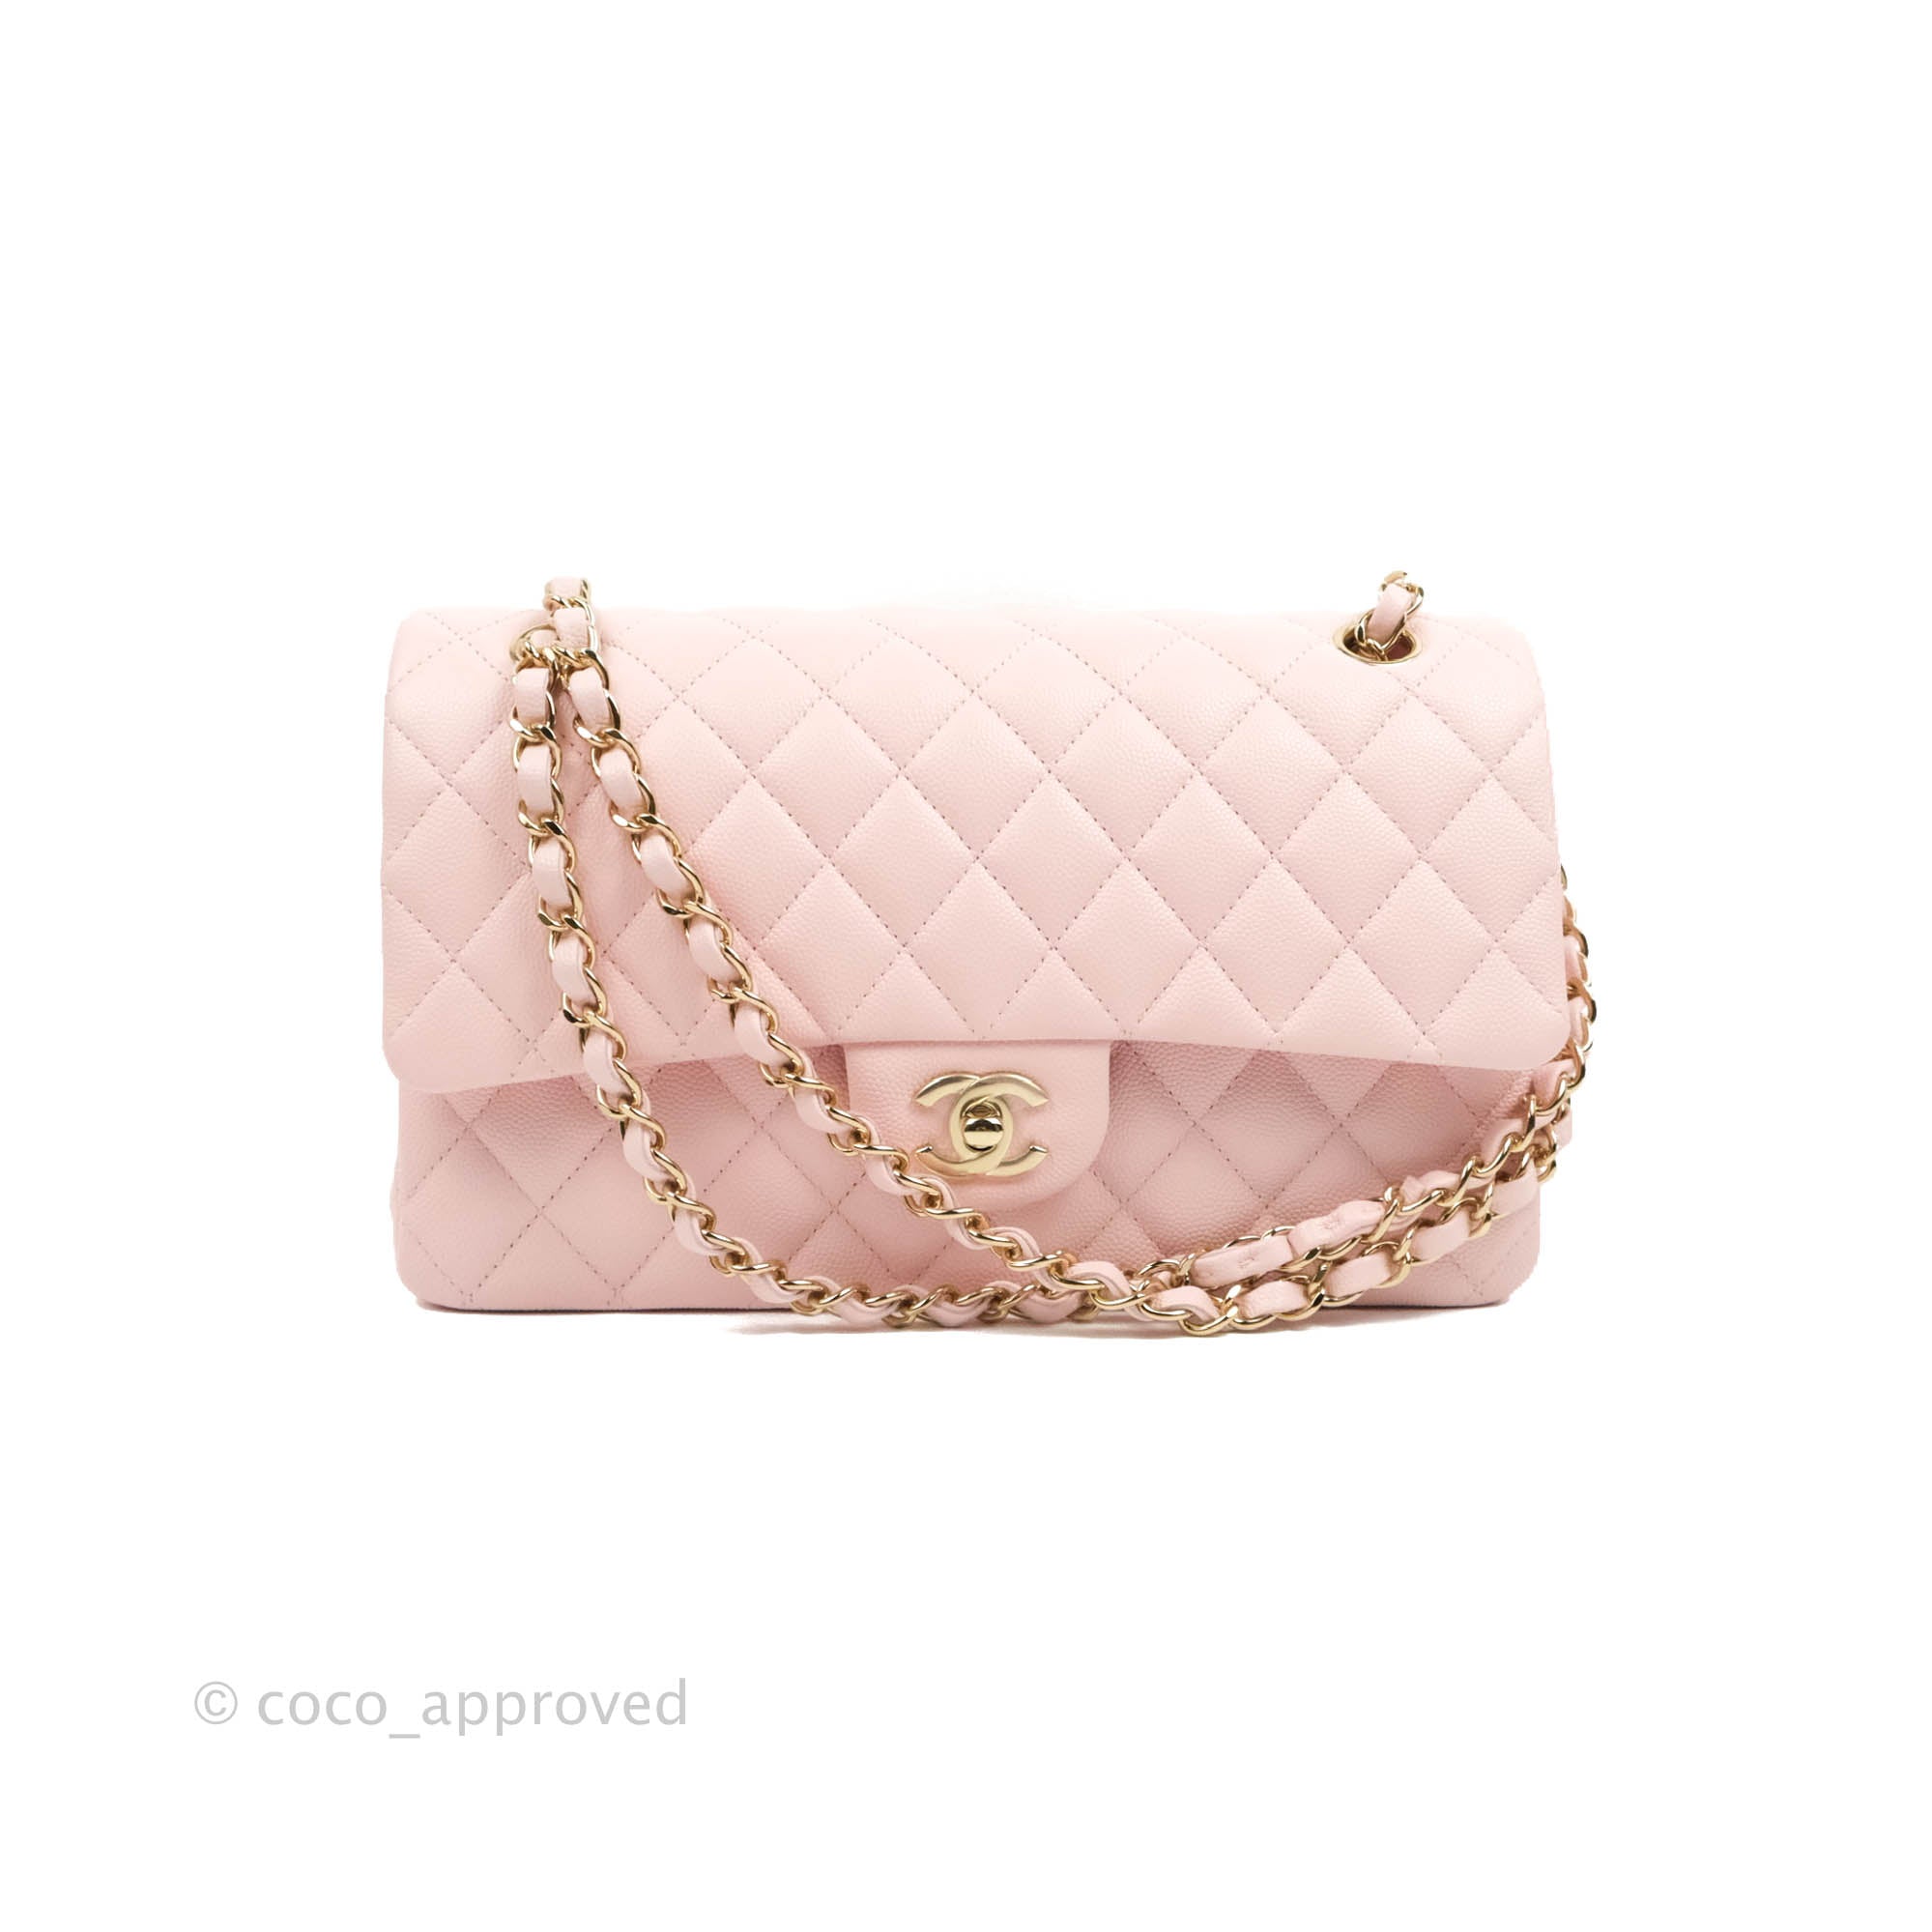 Brand New In Box Chanel 22S Pink Medium Classic Flap Bag